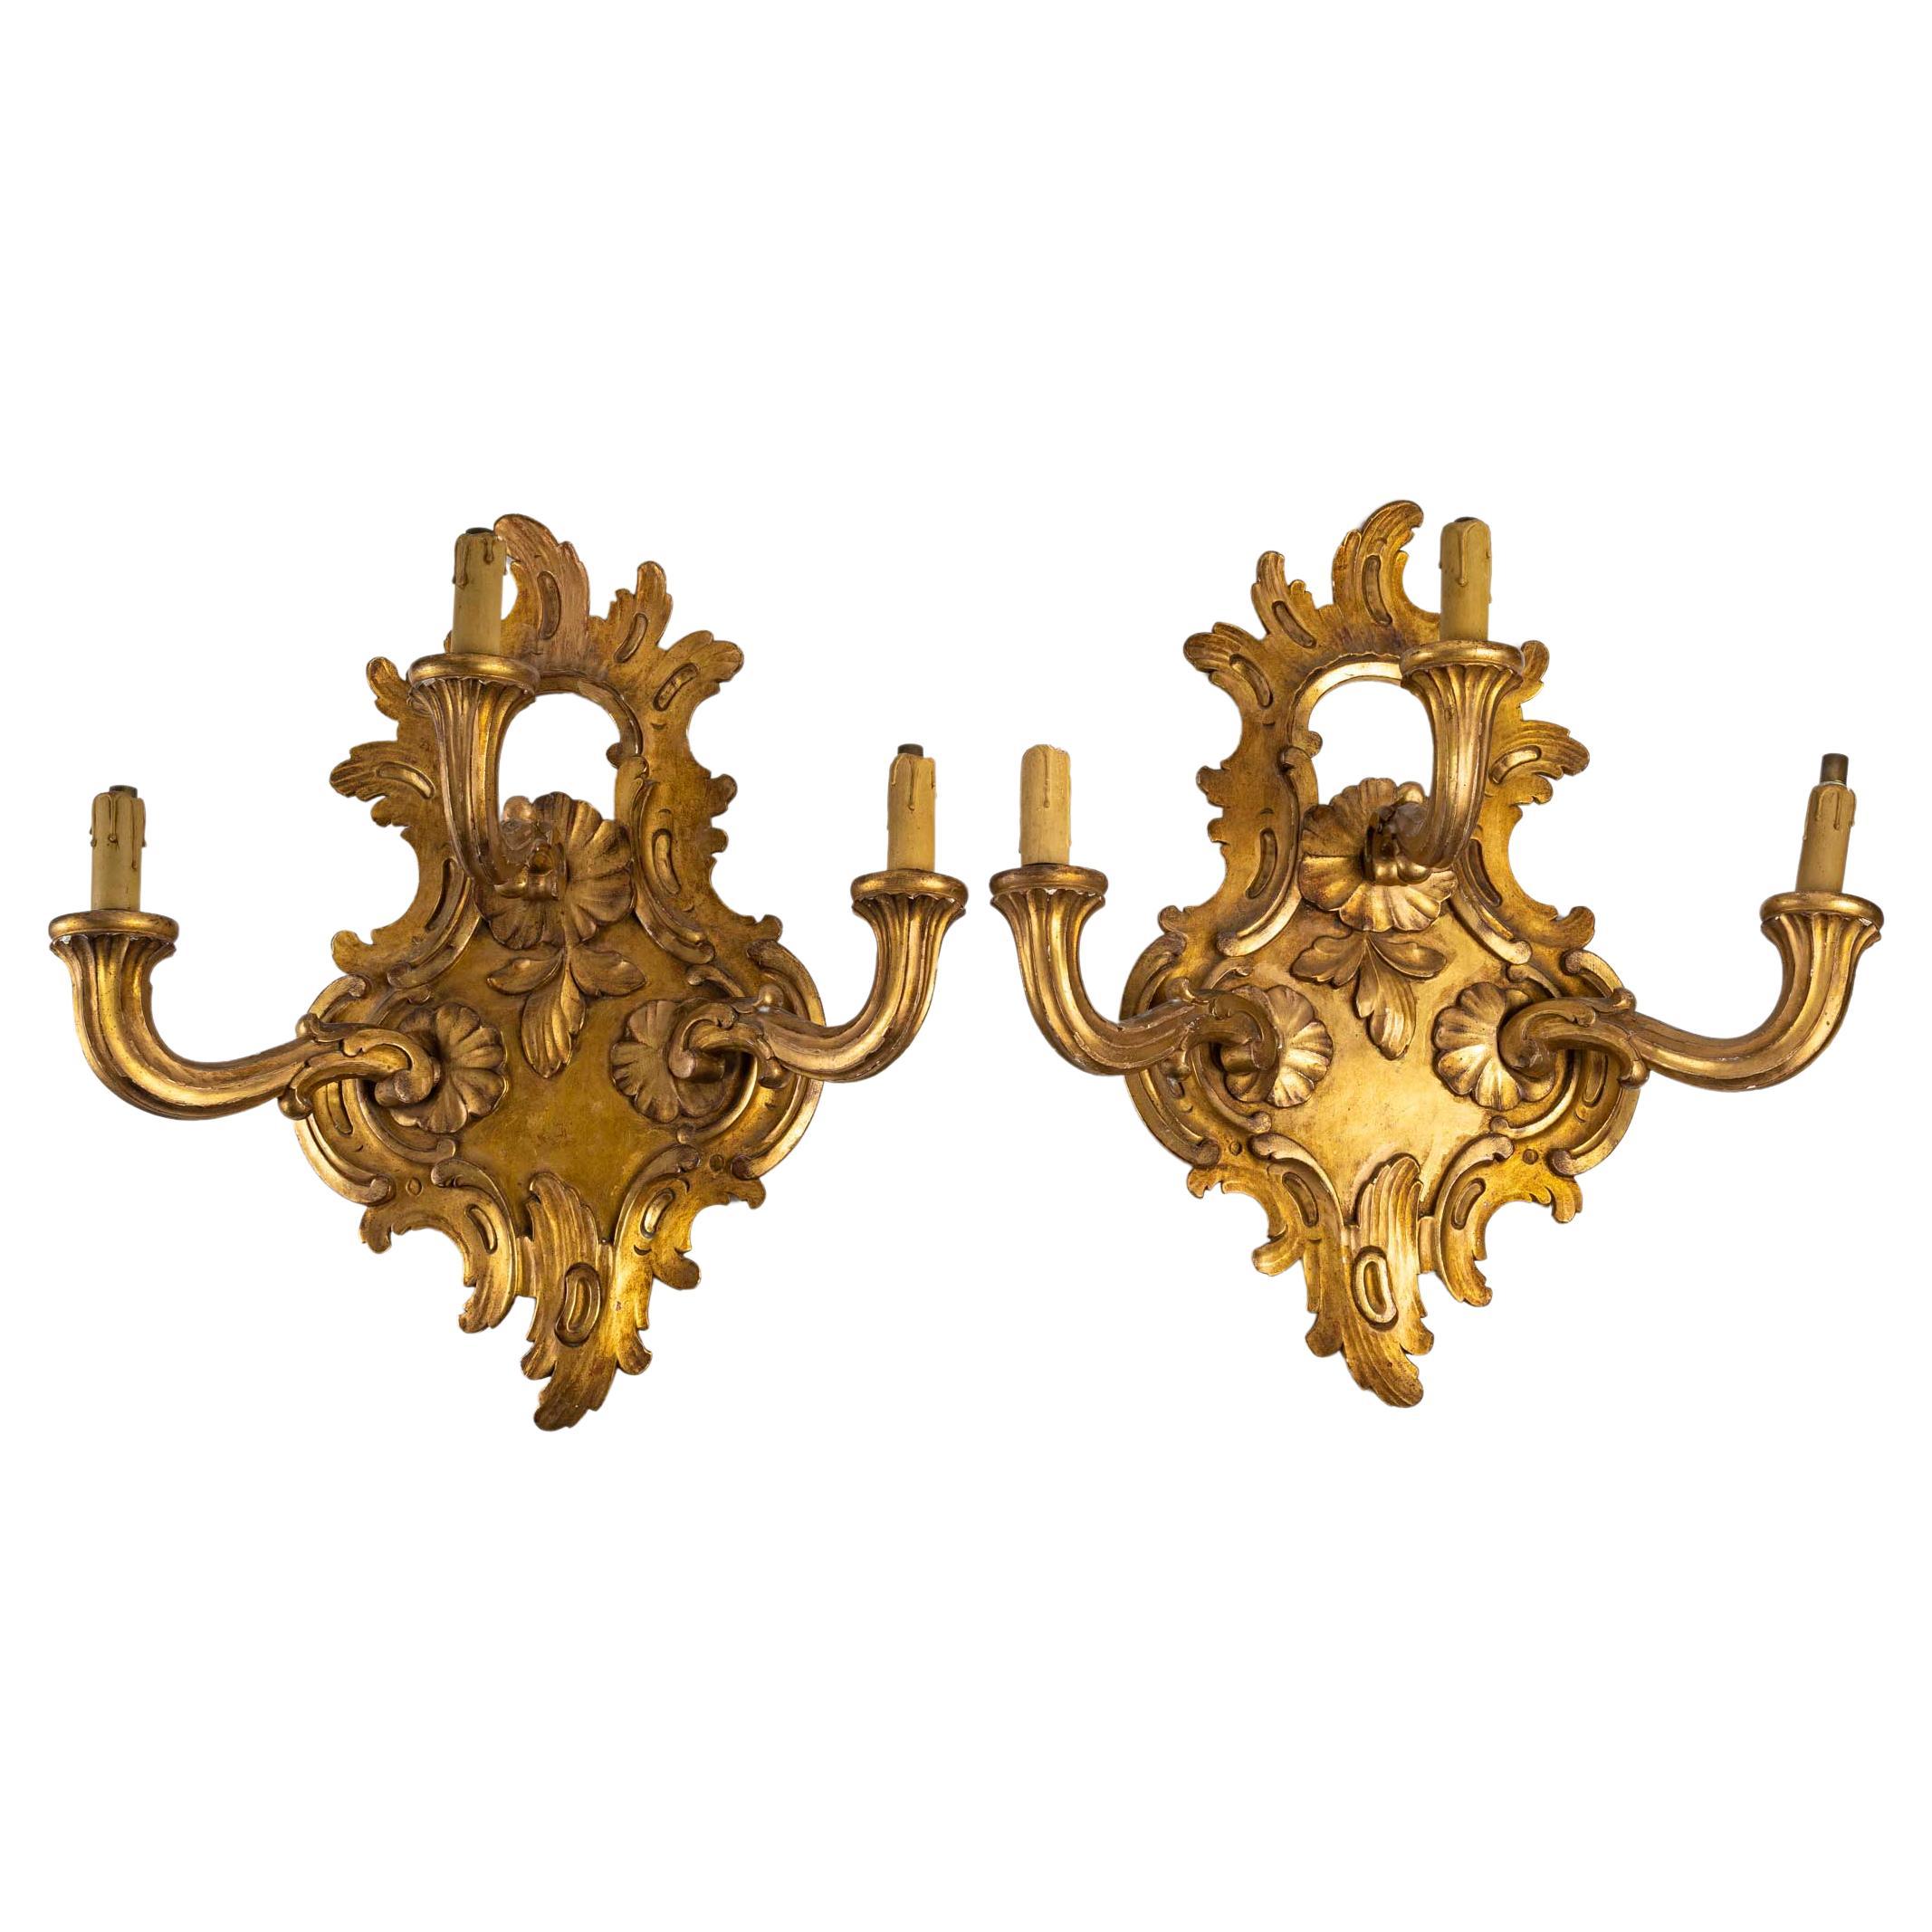 Important Pair of 19th Century Giltwood Wall Lights